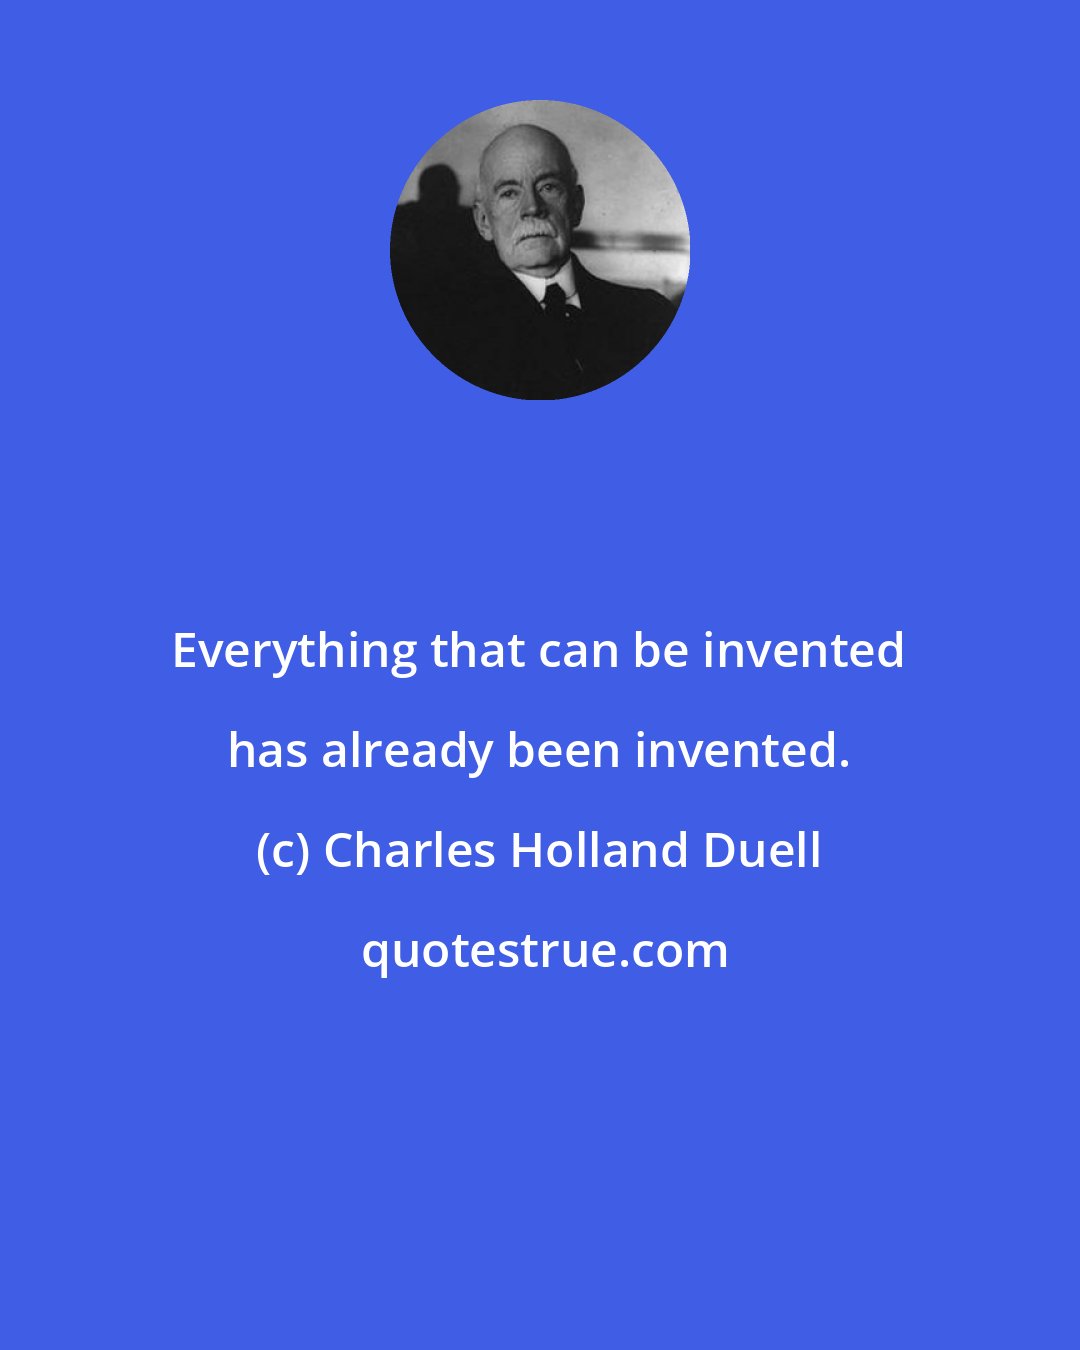 Charles Holland Duell: Everything that can be invented has already been invented.